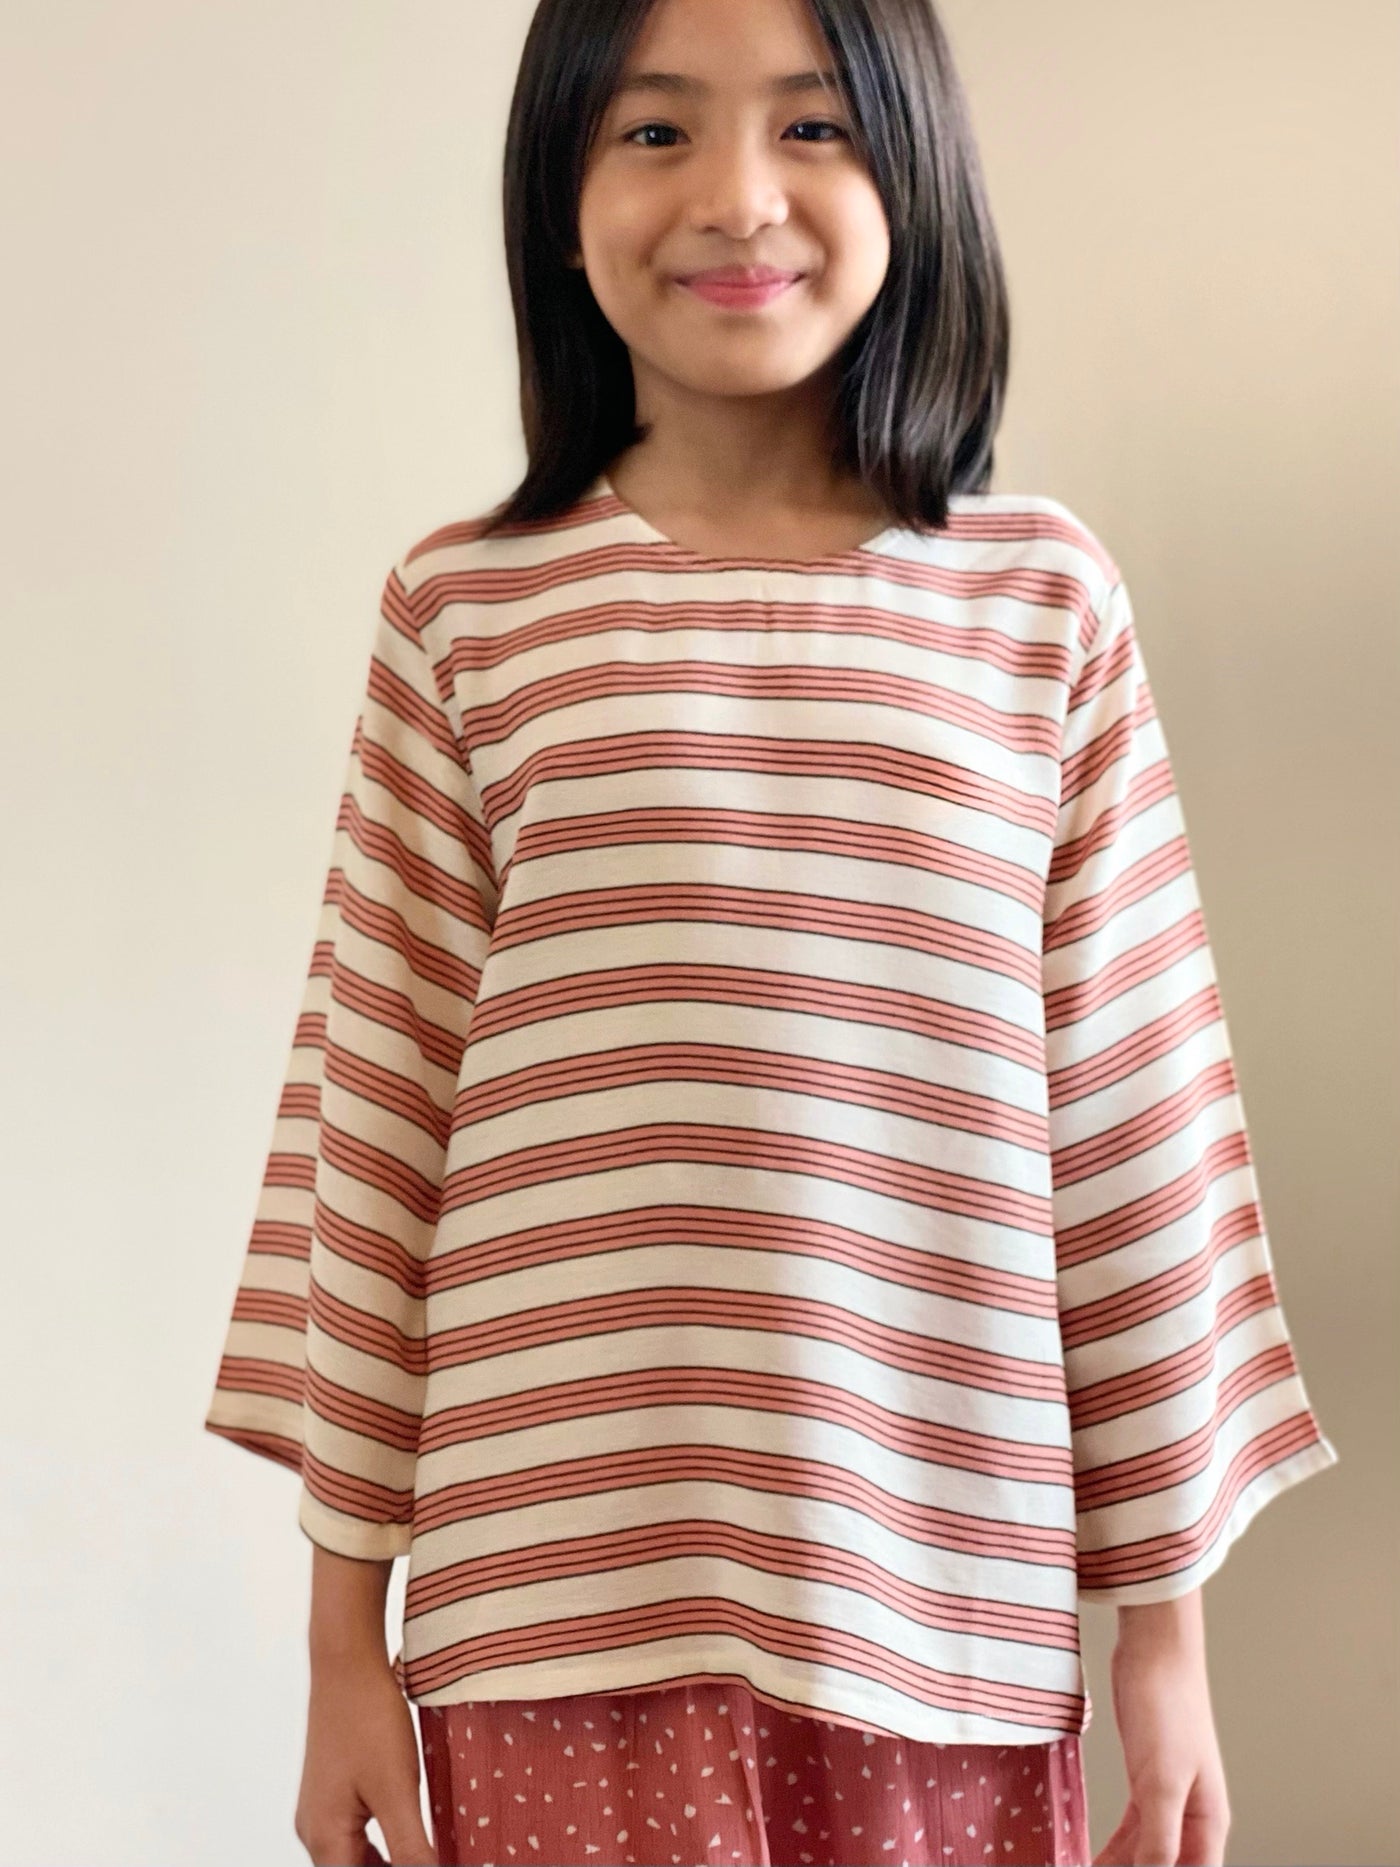 AISYA Striped Blouse in Dusty Pink (Top Only)